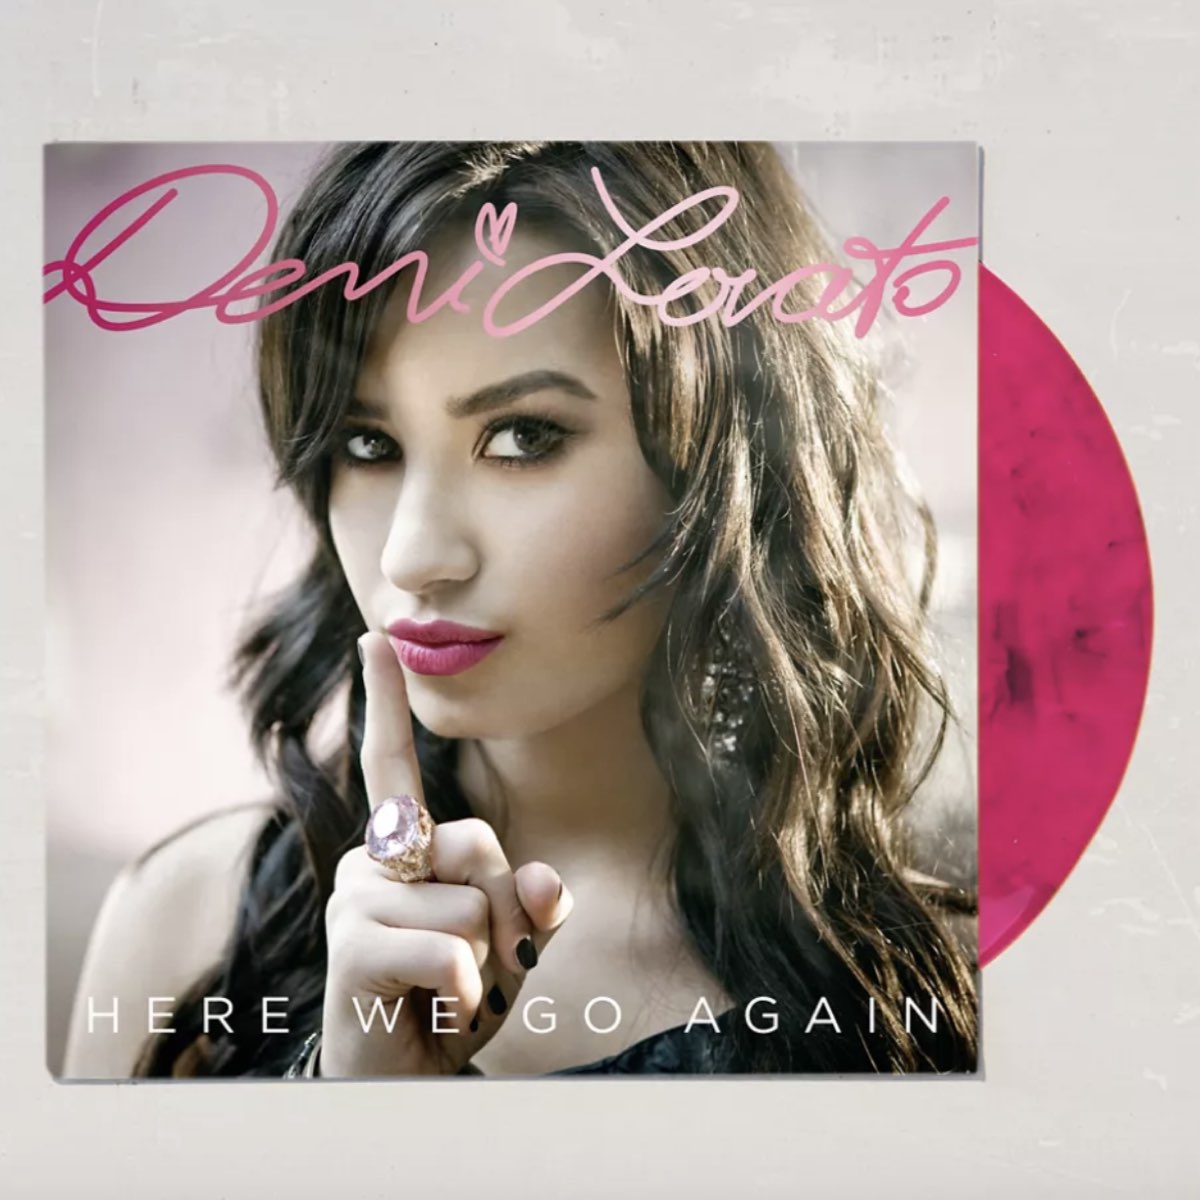 Demi Lovato - Here We Go Again [Limited Edition - Pink and Black Splattered Vinyl]